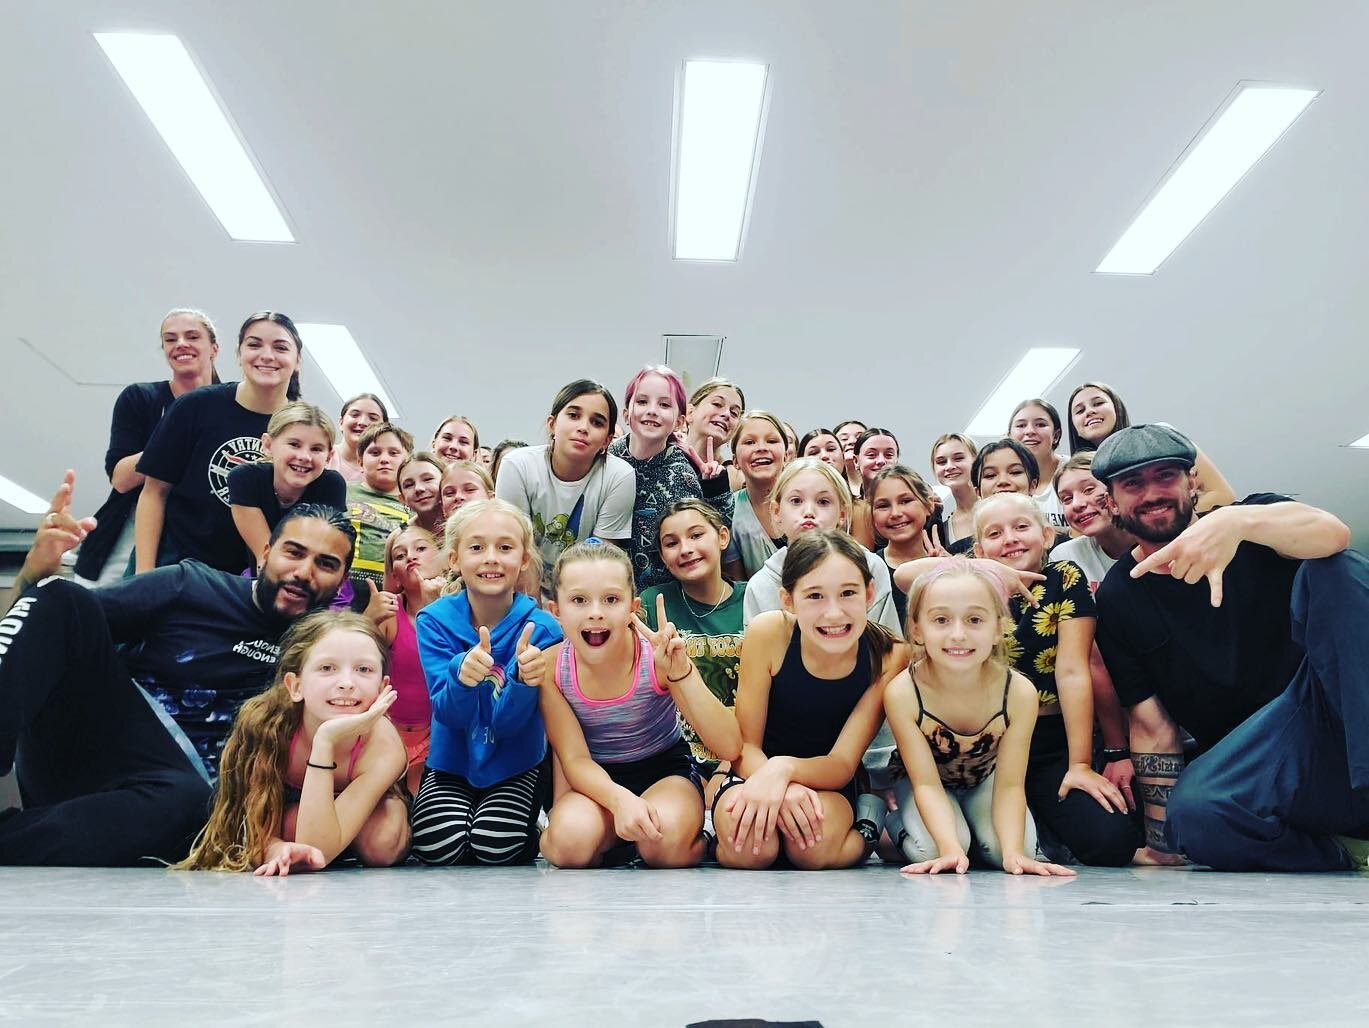 DAY 3 at @peakperformancedanceco #photodump 

Welcome to G2 Entertainment! Western Canada's most immersive training and choreography company led by Edgar Reyes and Lukas Lock. 

We deliver authentic Hip Hop productions &amp; training workshops to stu